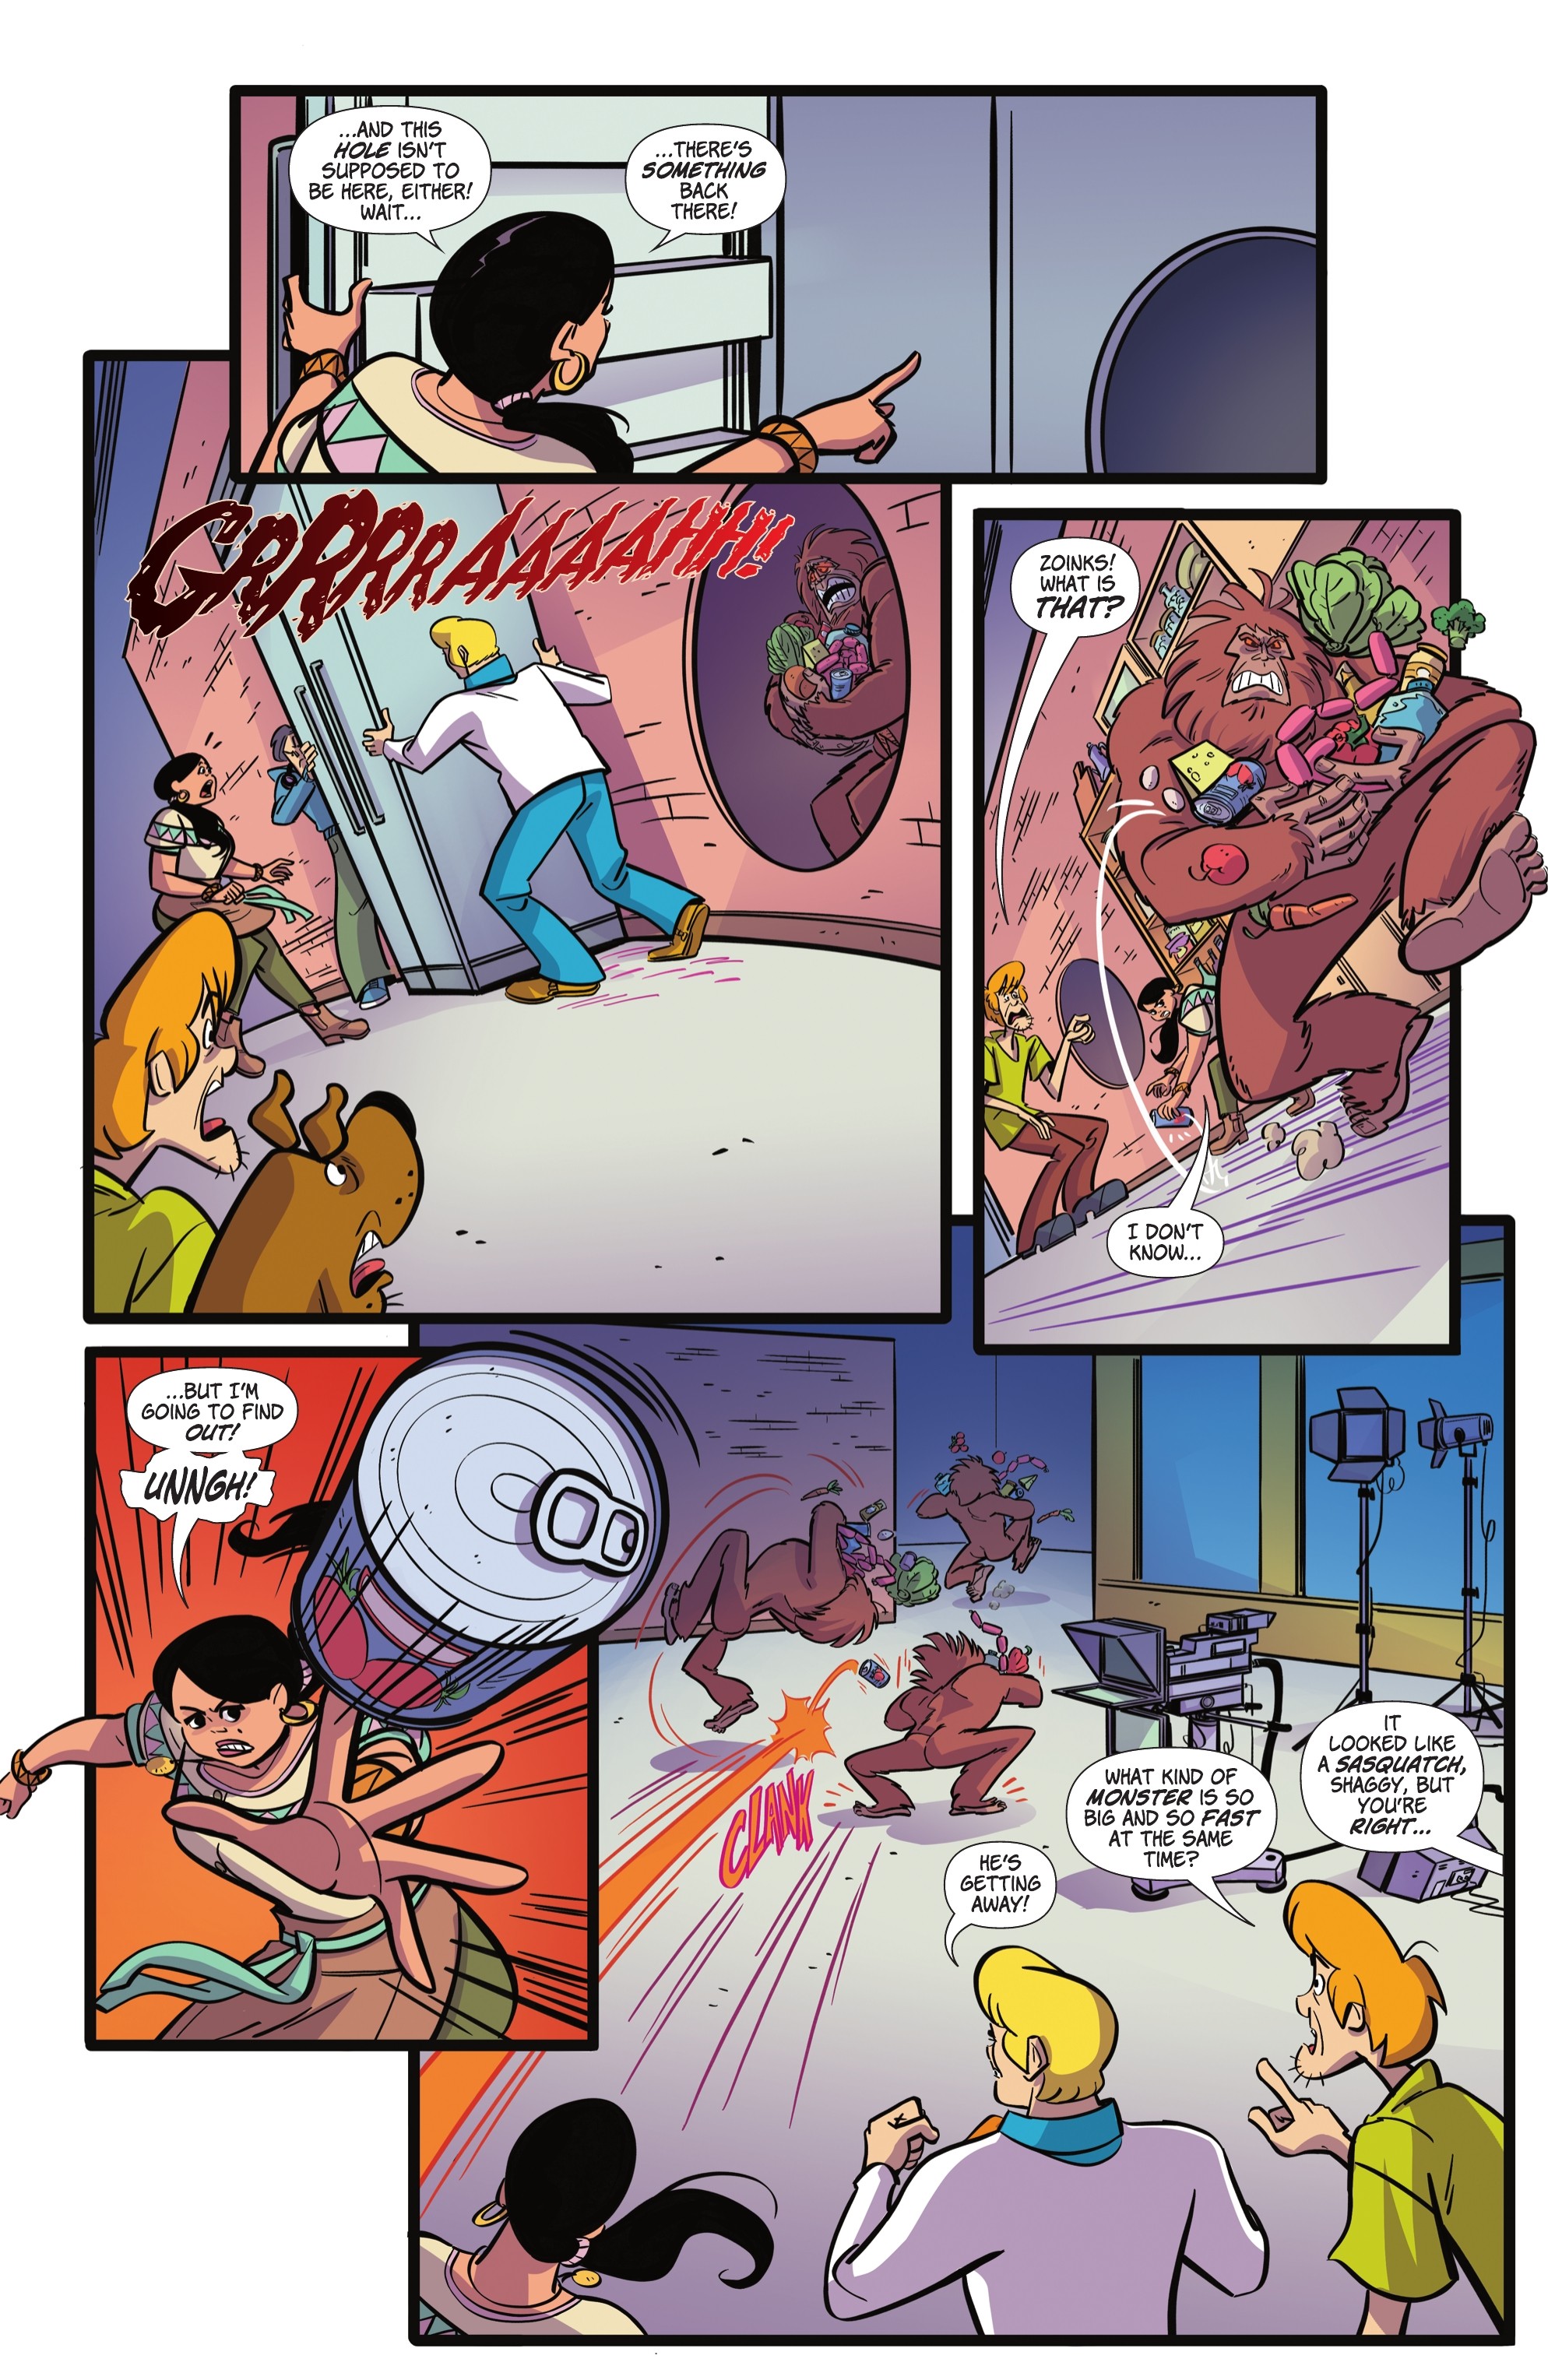 Scooby-Doo, Where Are You? (2010-): Chapter 117 - Page 3